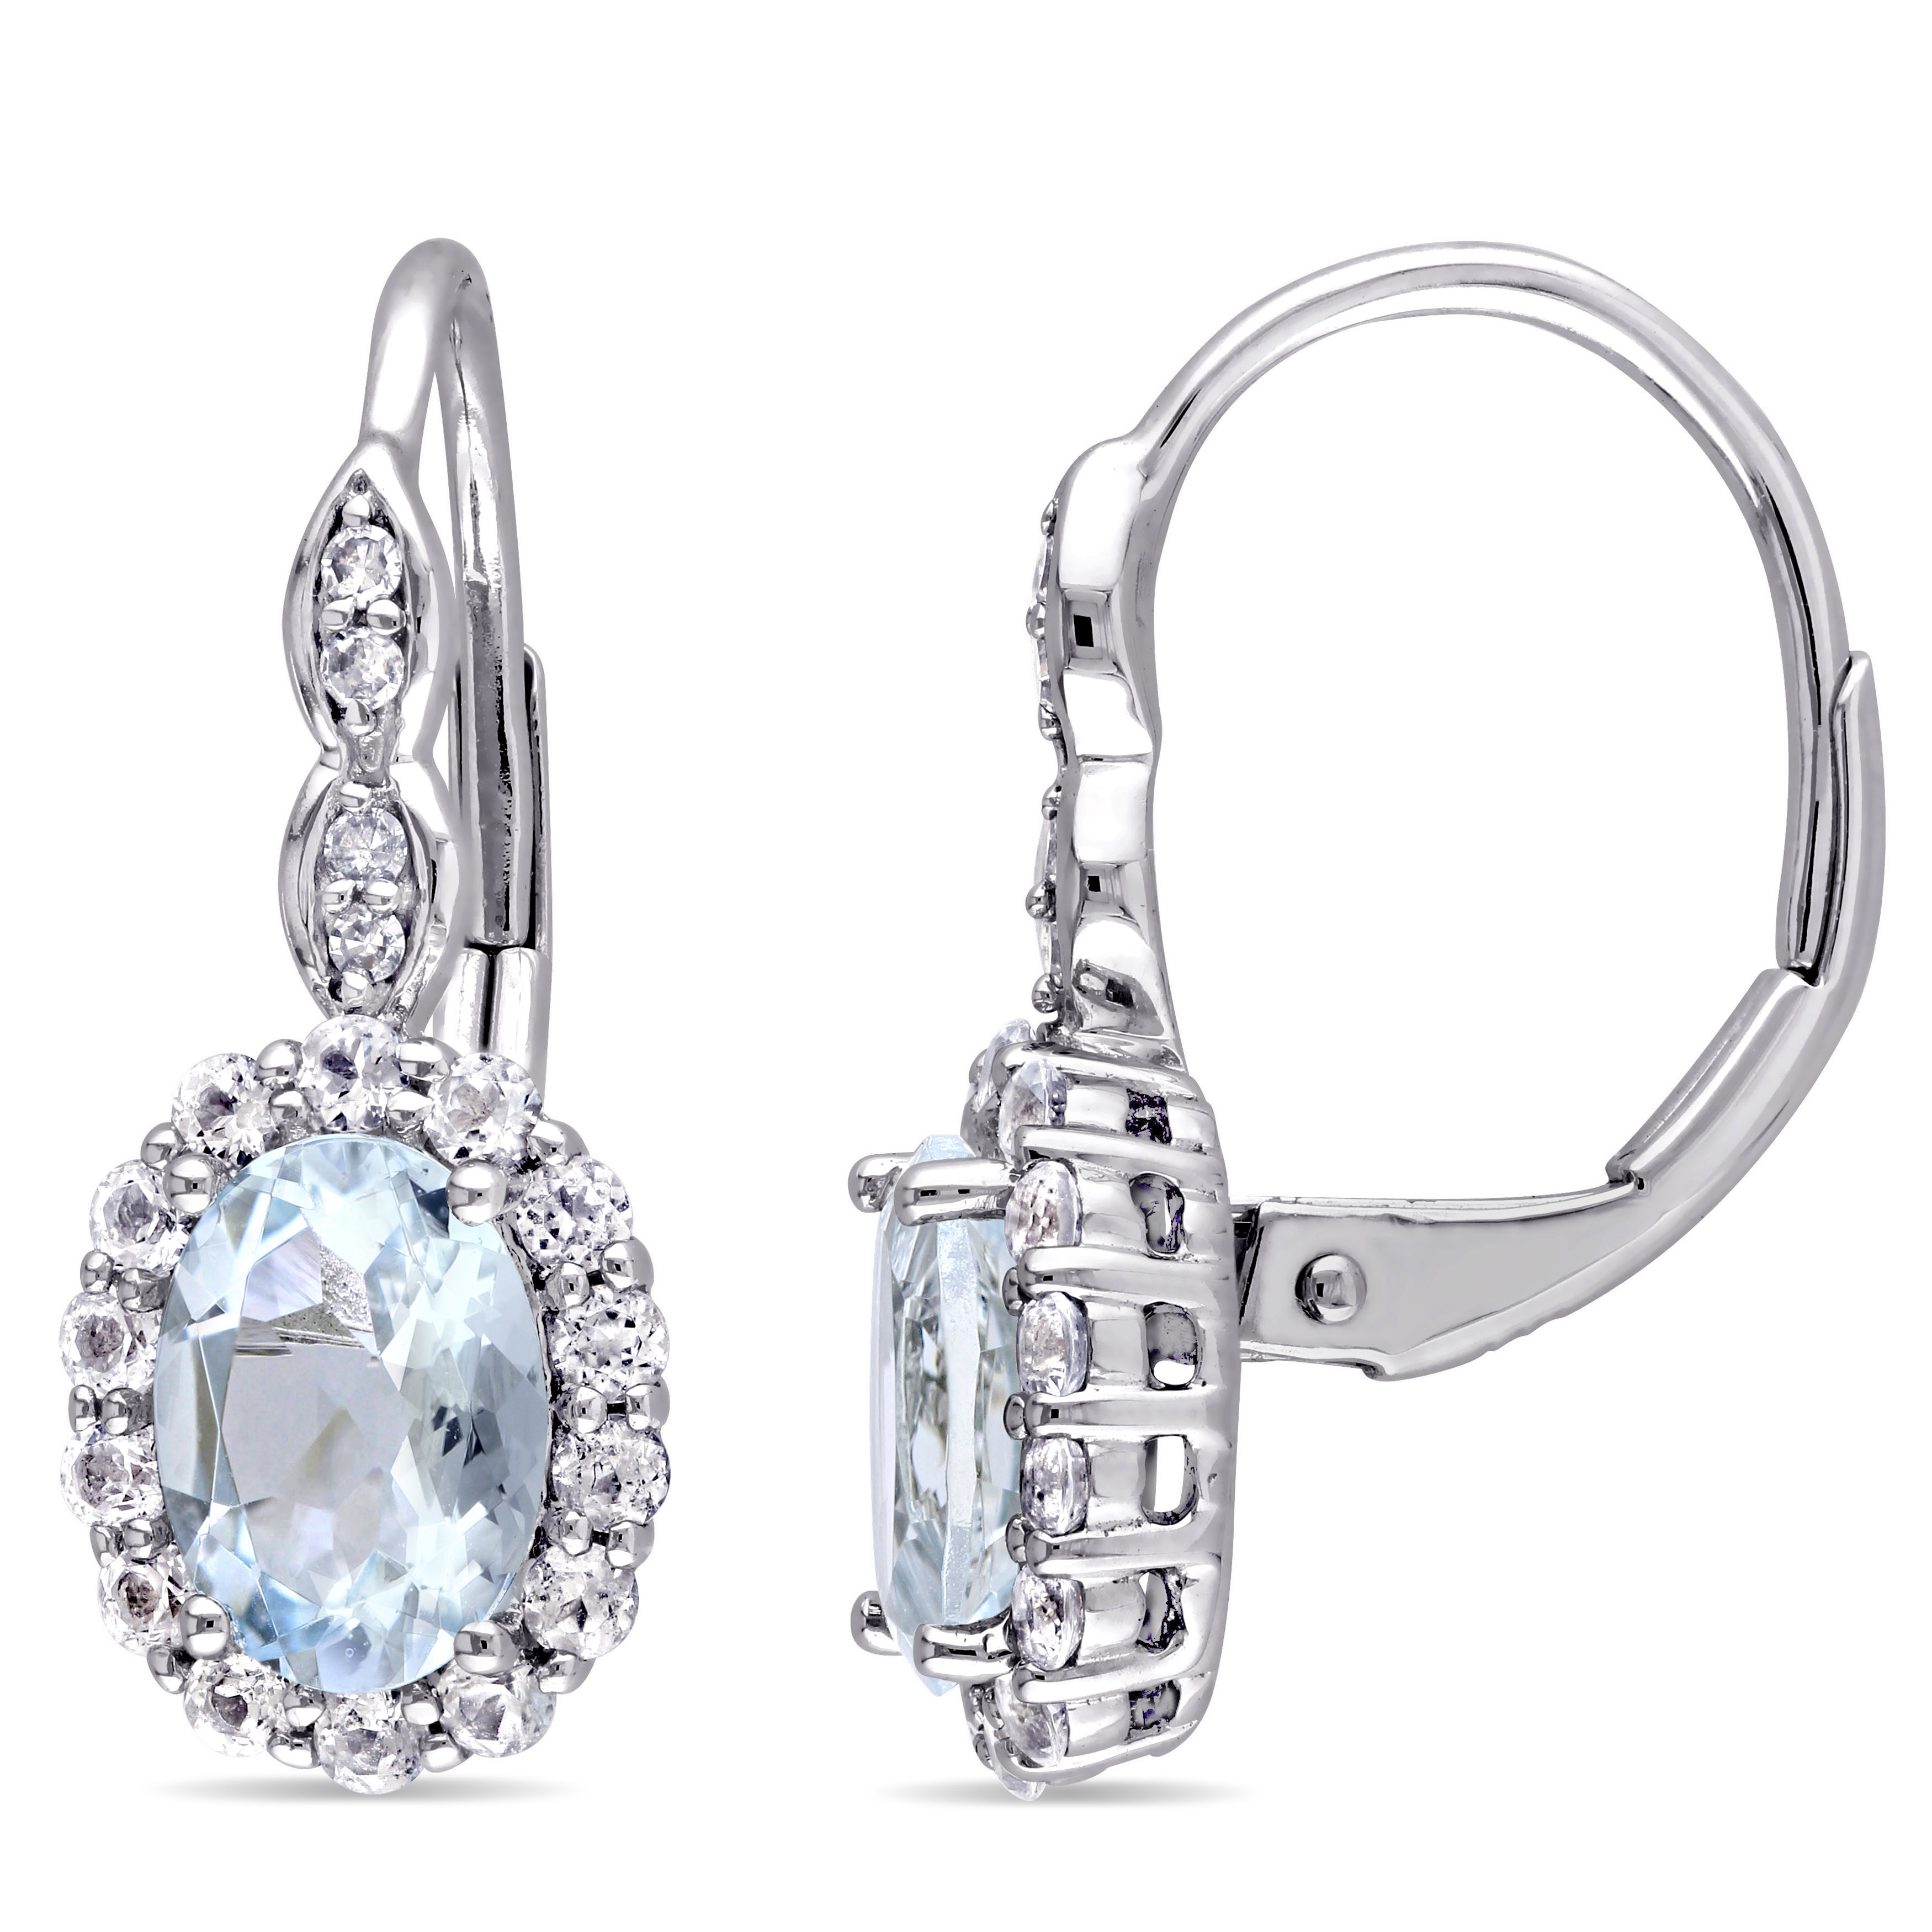 2 CT TGW Oval Shape Aquamarine, White Topaz and Diamond Accent Vintage LeverBack Earrings in 14k White Gold